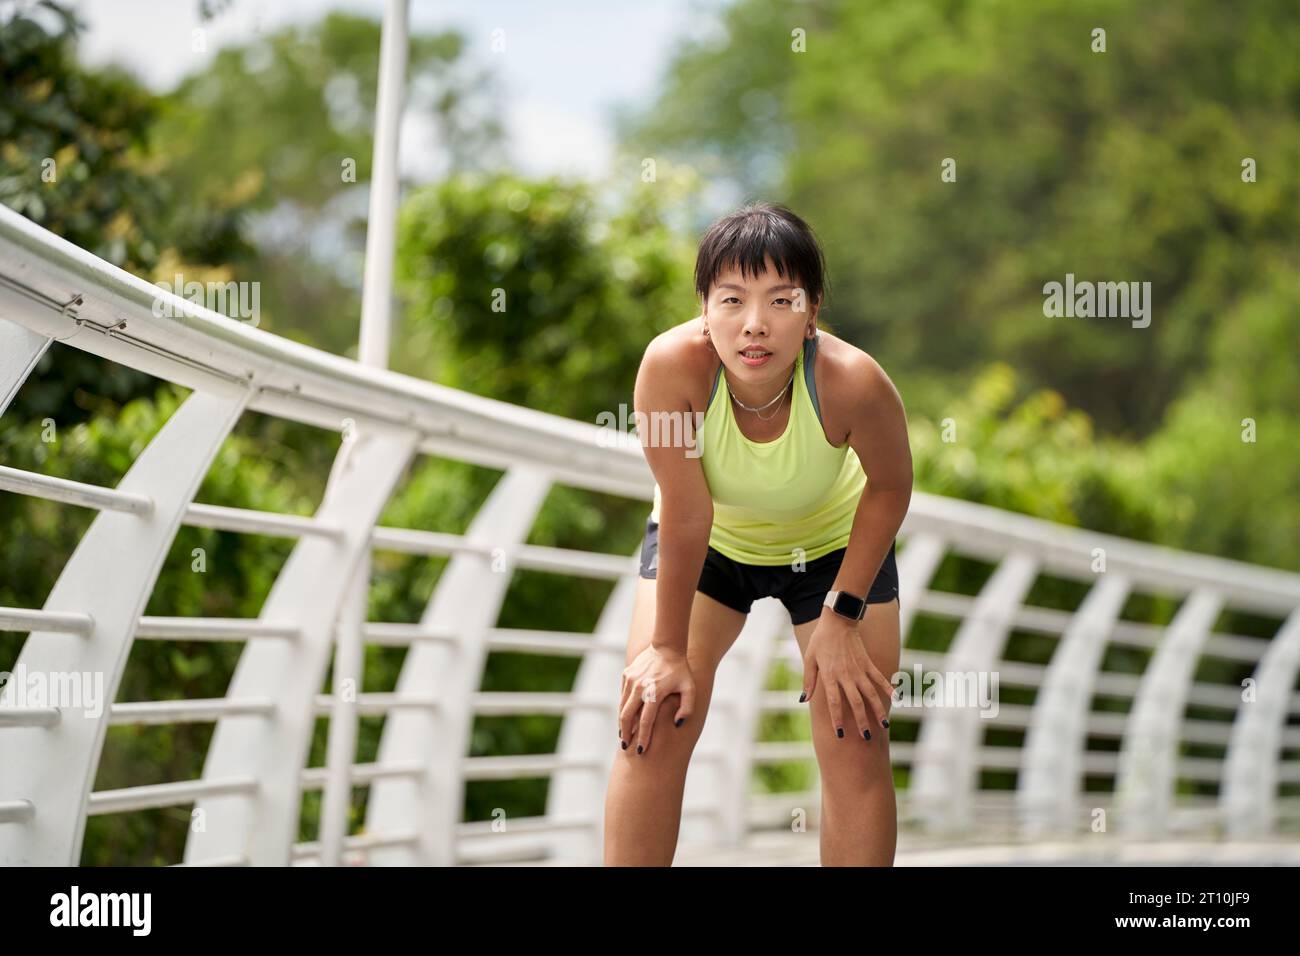 young asian woman female jogger getting ready to run outdoors Stock Photo